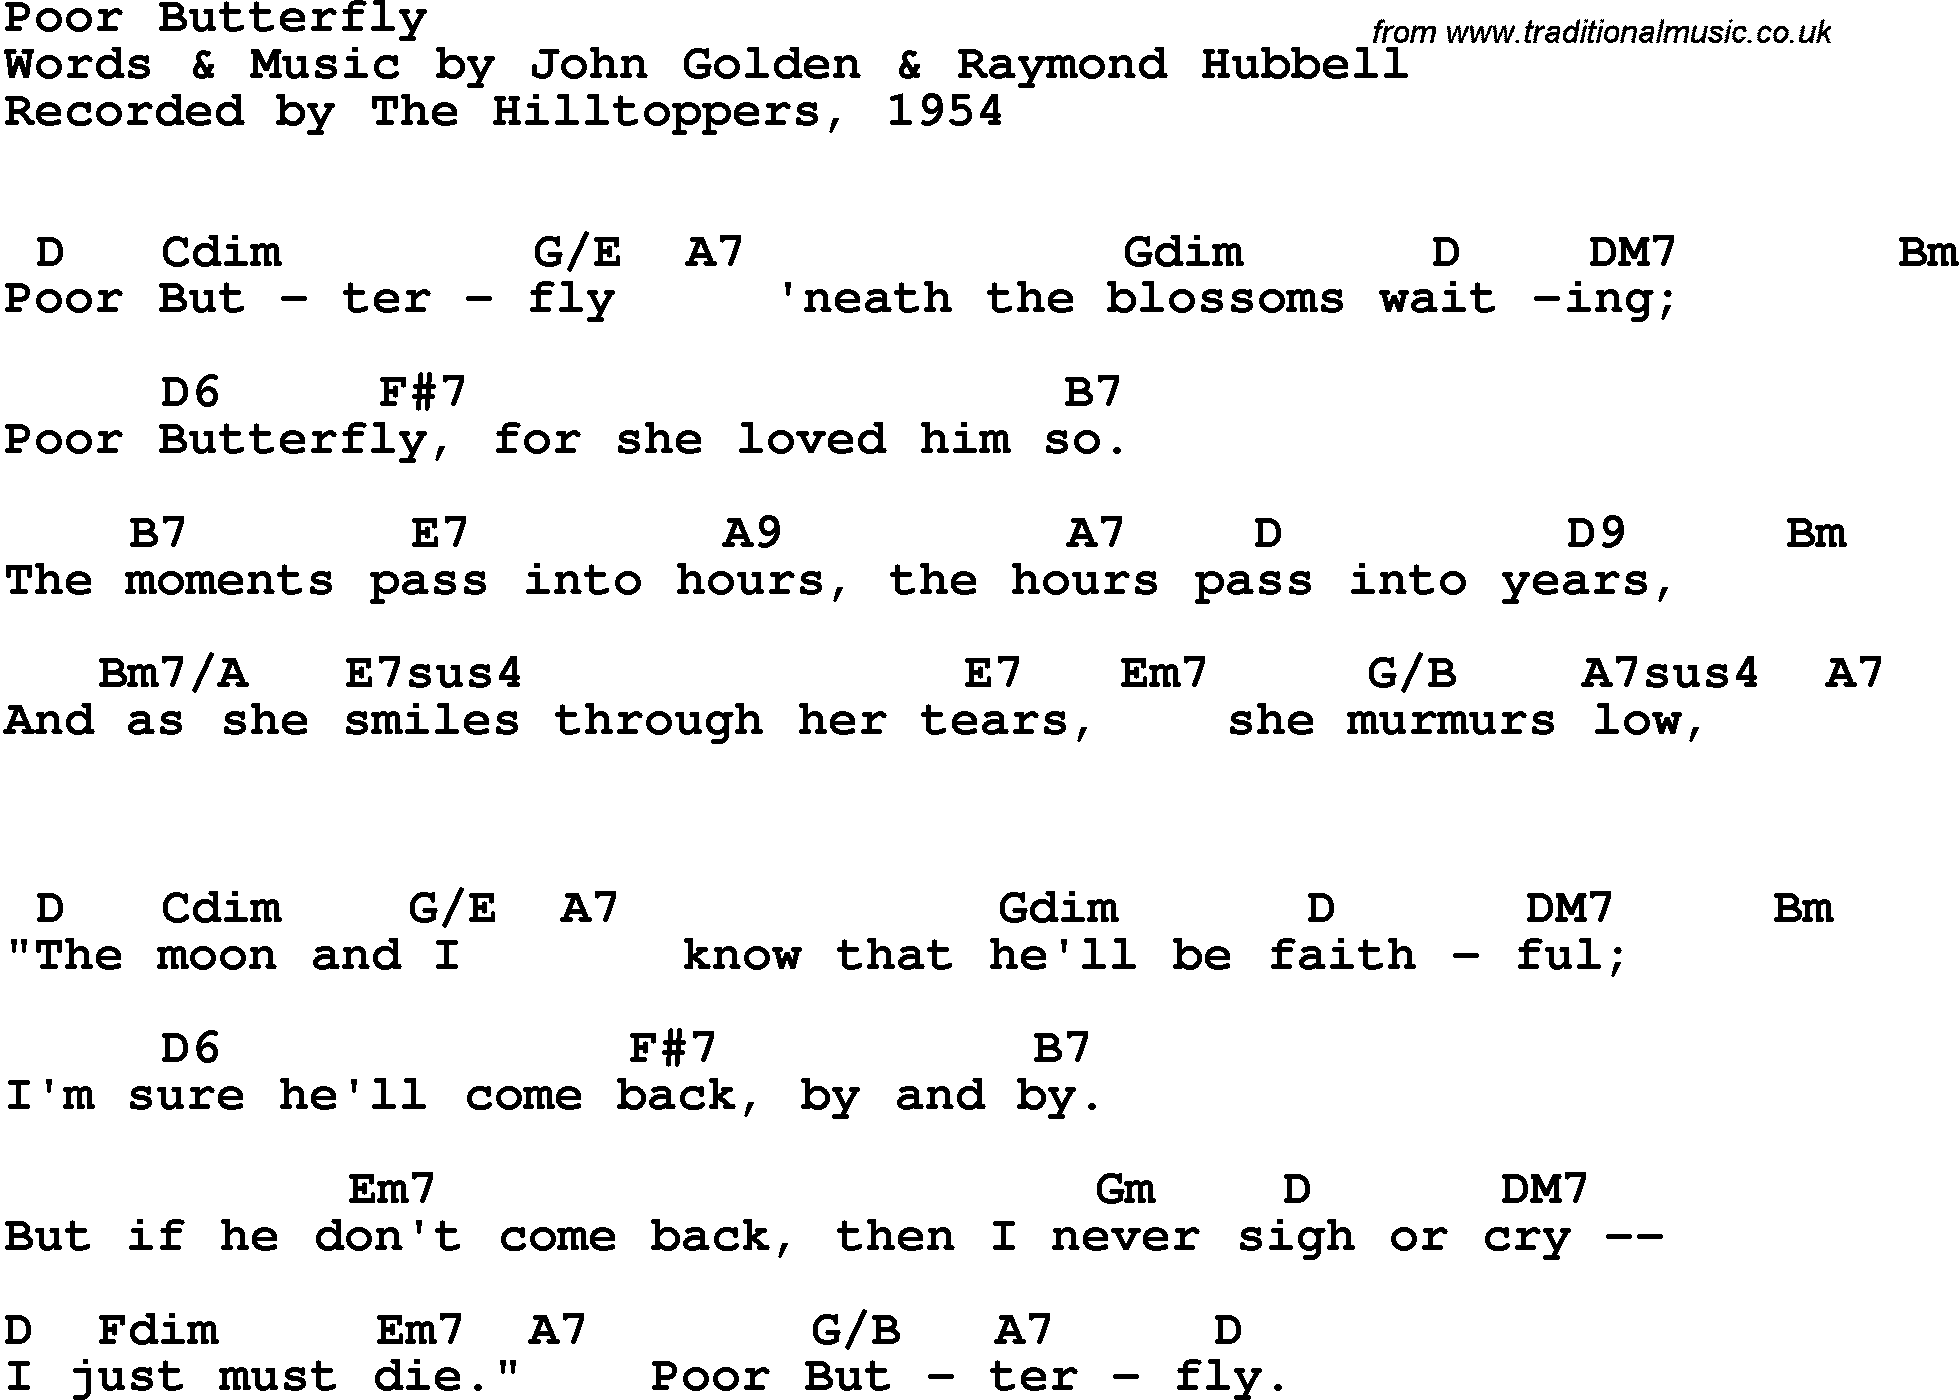 Song Lyrics with guitar chords for Poor Butterfly - The Hilltoppers, 1954